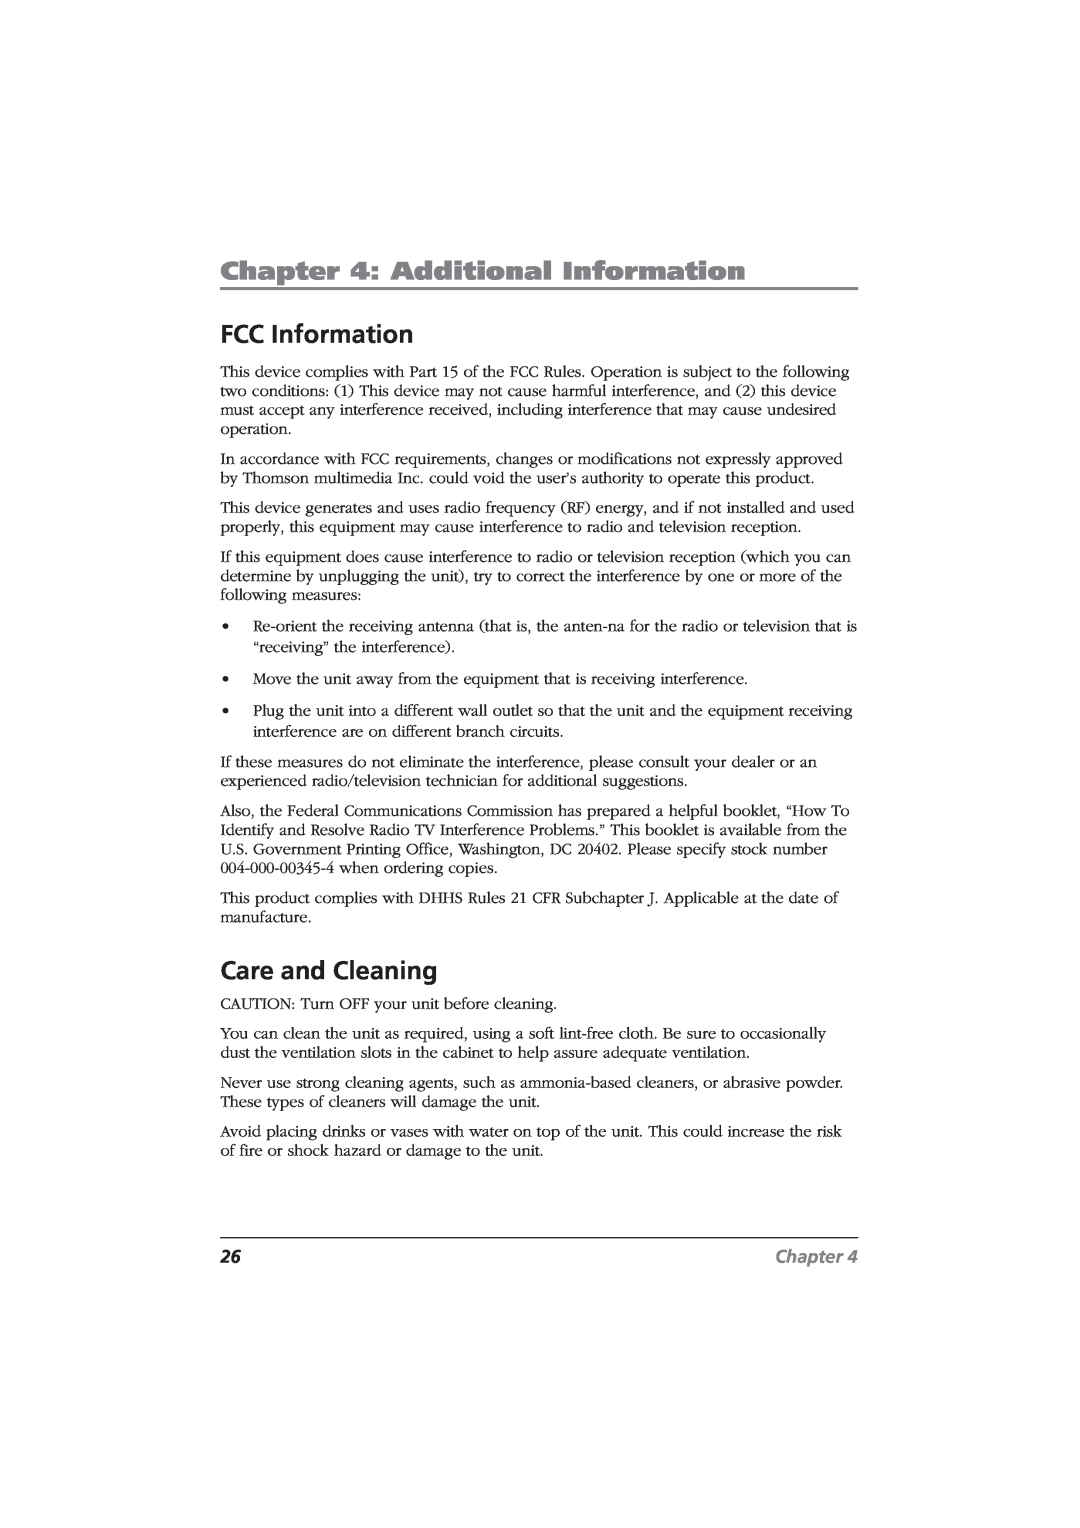 RCA CDRW10 manual FCC Information, Care and Cleaning, Additional Information, Chapter 